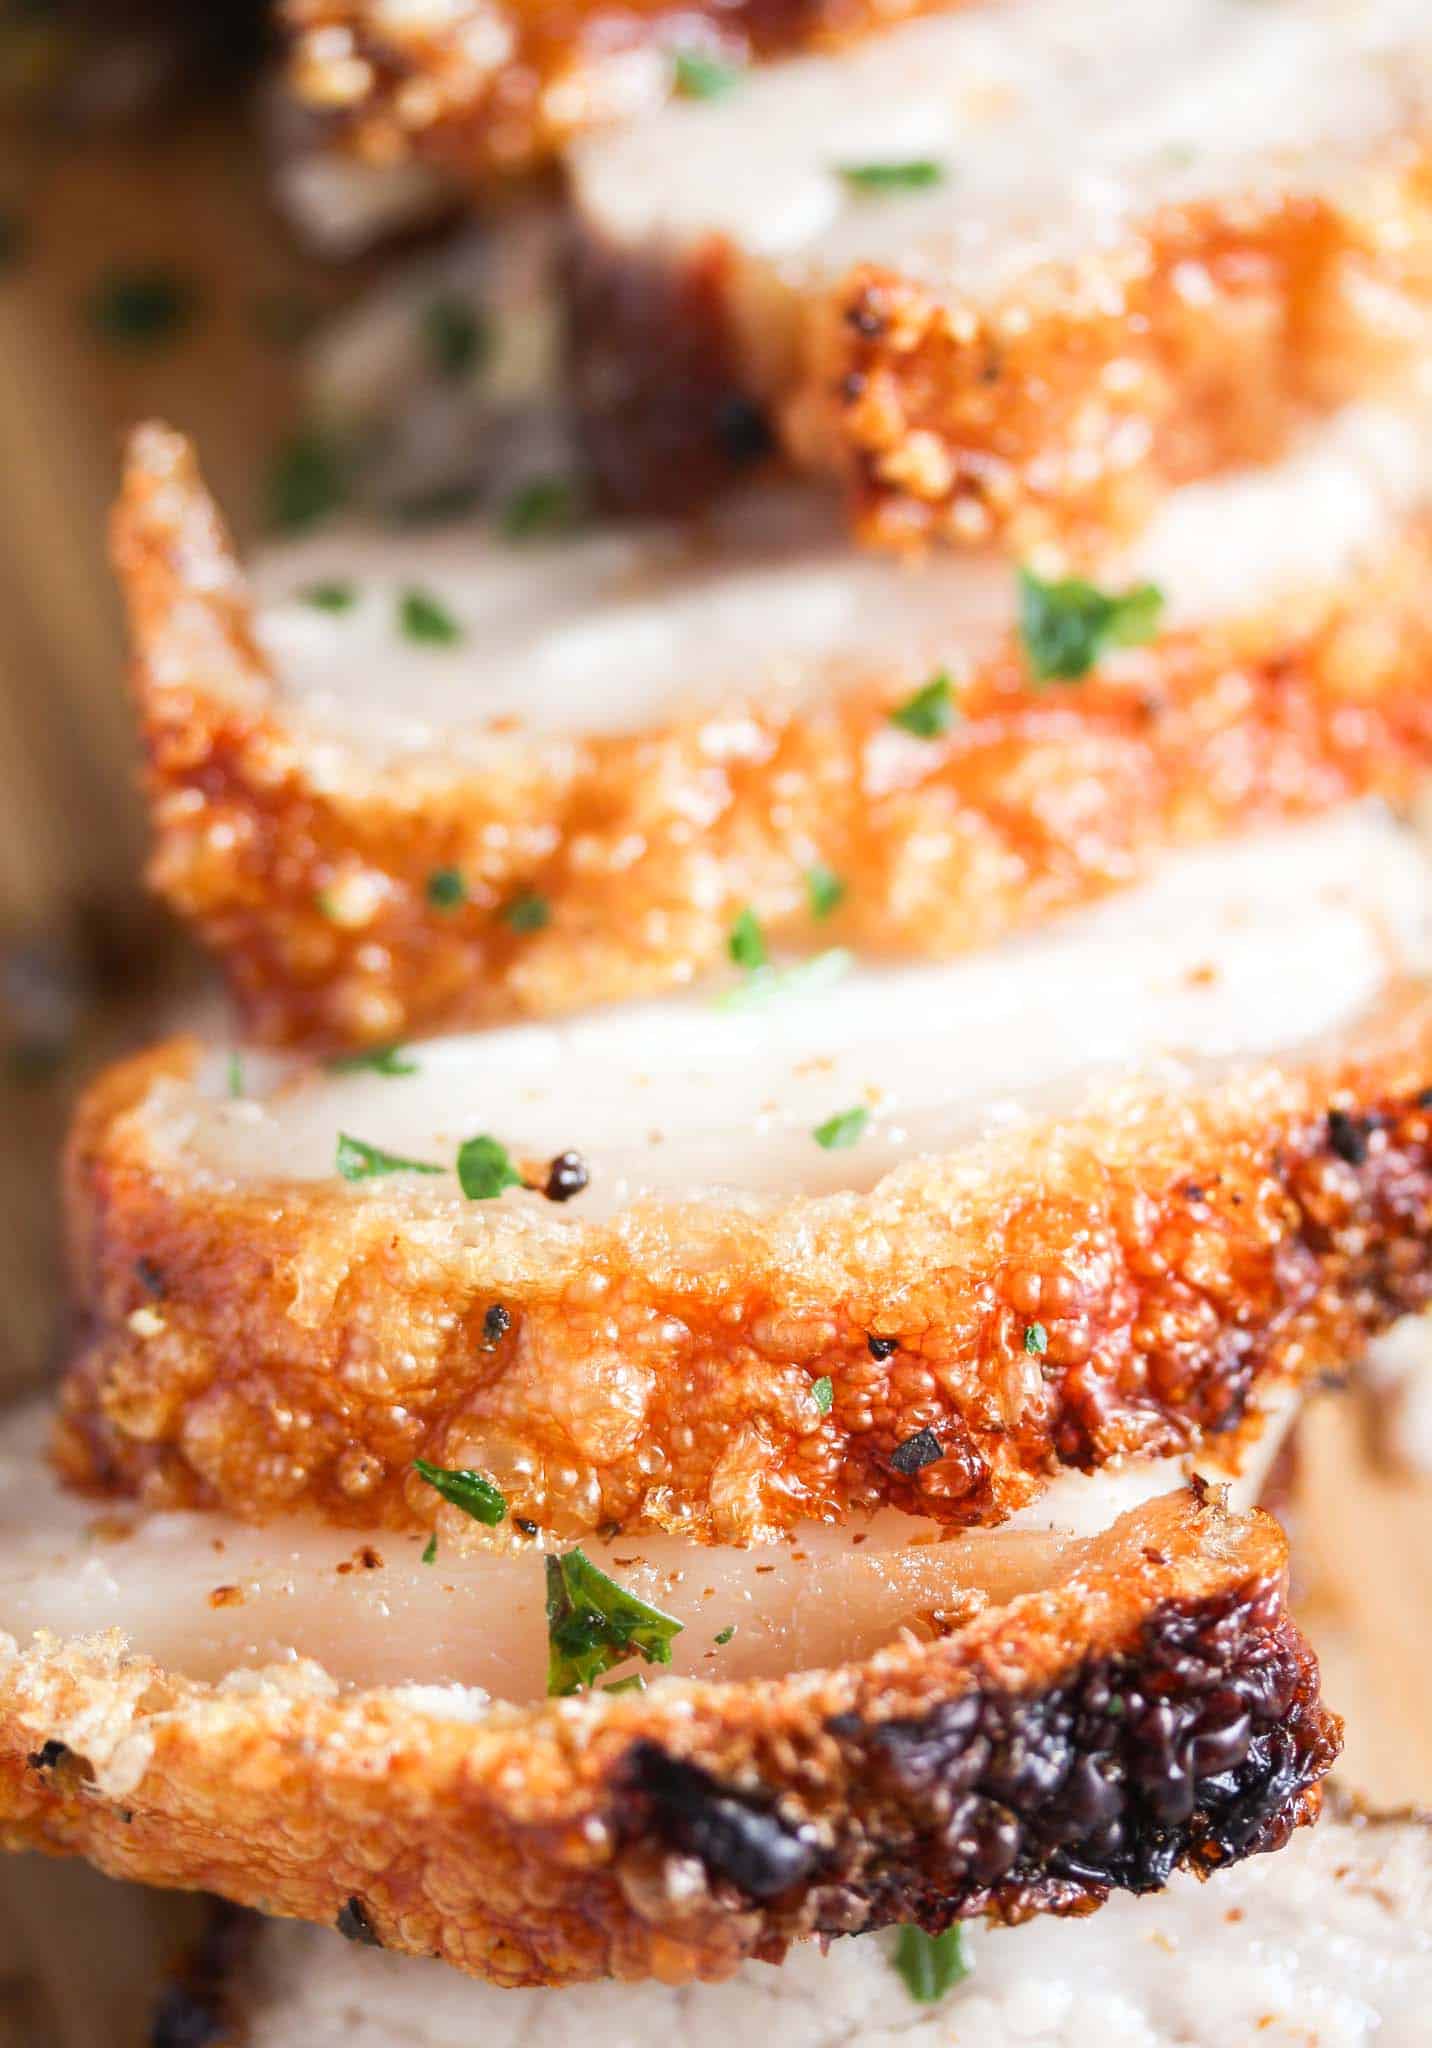 crispy pork with crackling sliced on a wooden board and sprinkled with parsley.